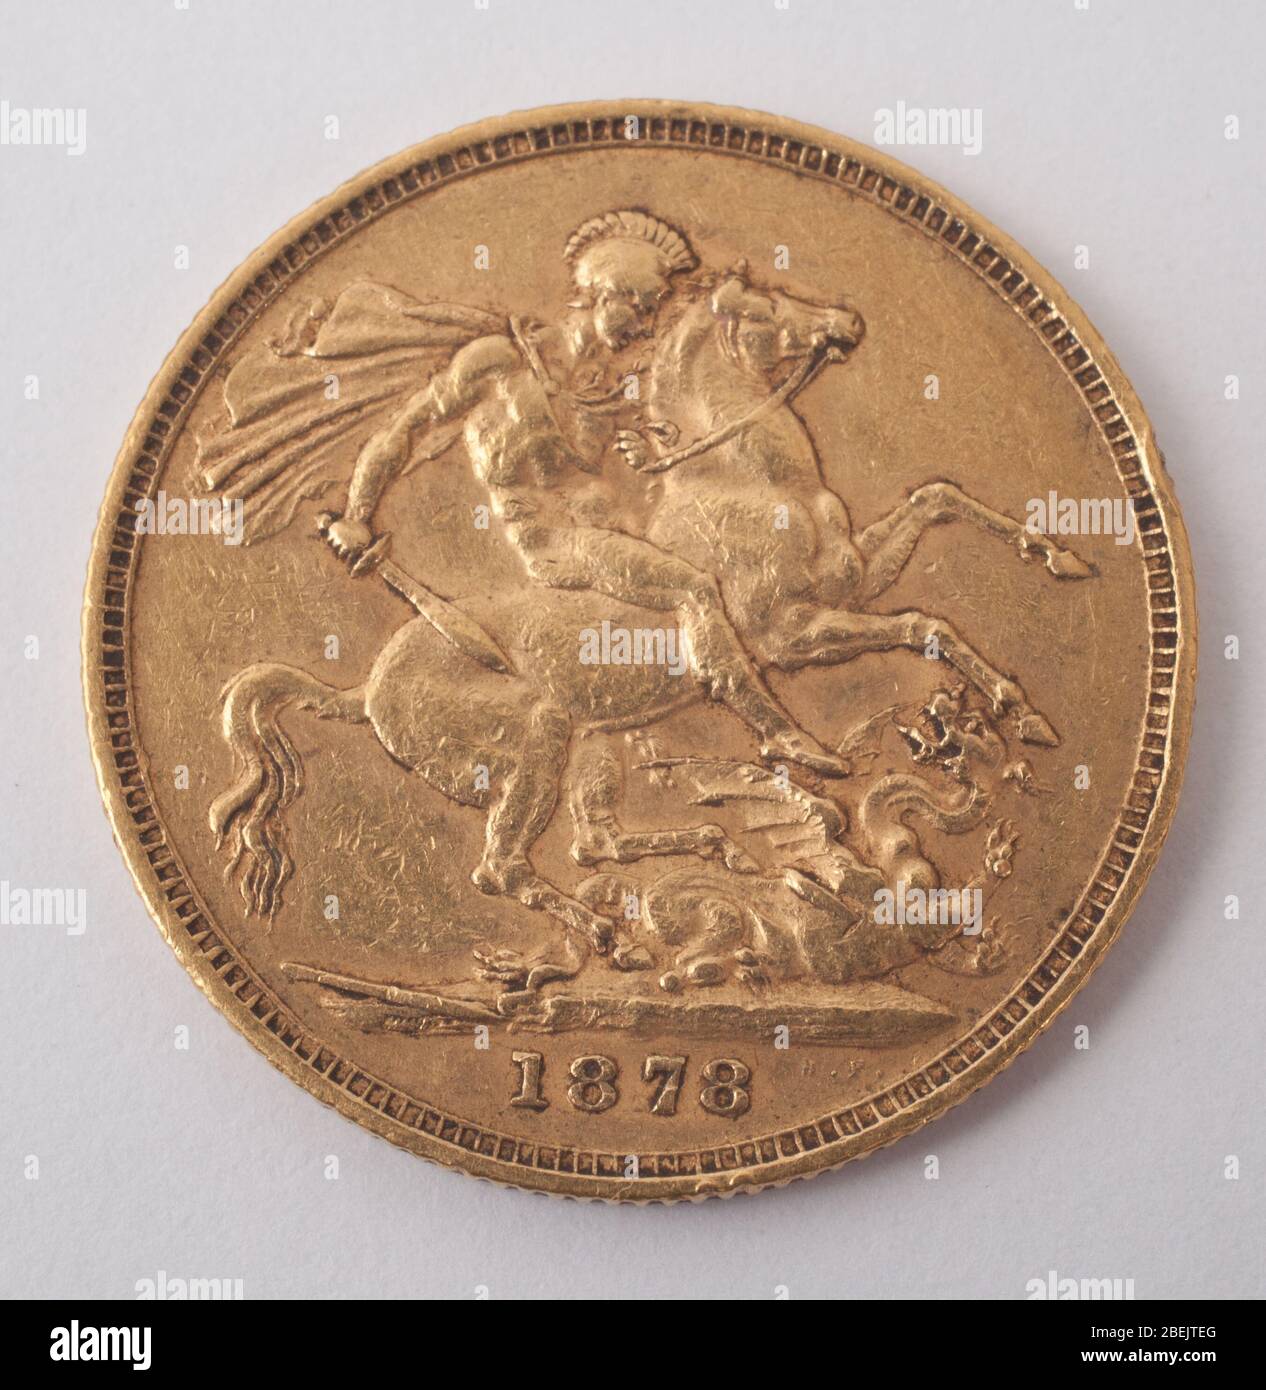 An English Gold Sovereign dated 1878 from the reign of Queen Victoria Stock Photo